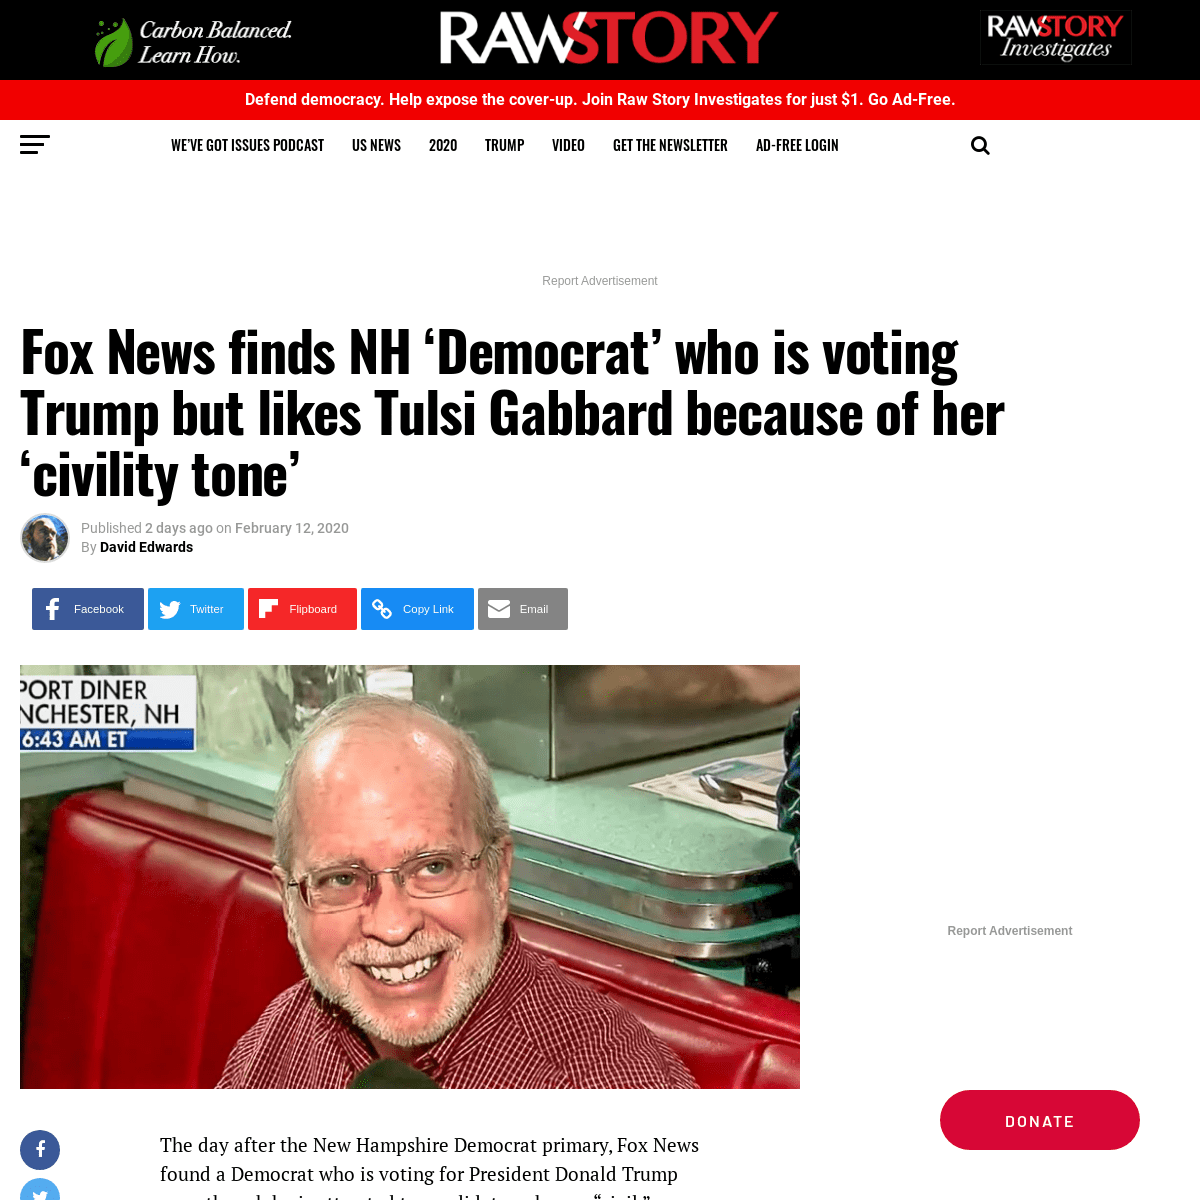 A complete backup of www.rawstory.com/2020/02/fox-news-finds-nh-democrat-who-is-voting-trump-but-likes-tulsi-gabbard-because-of-